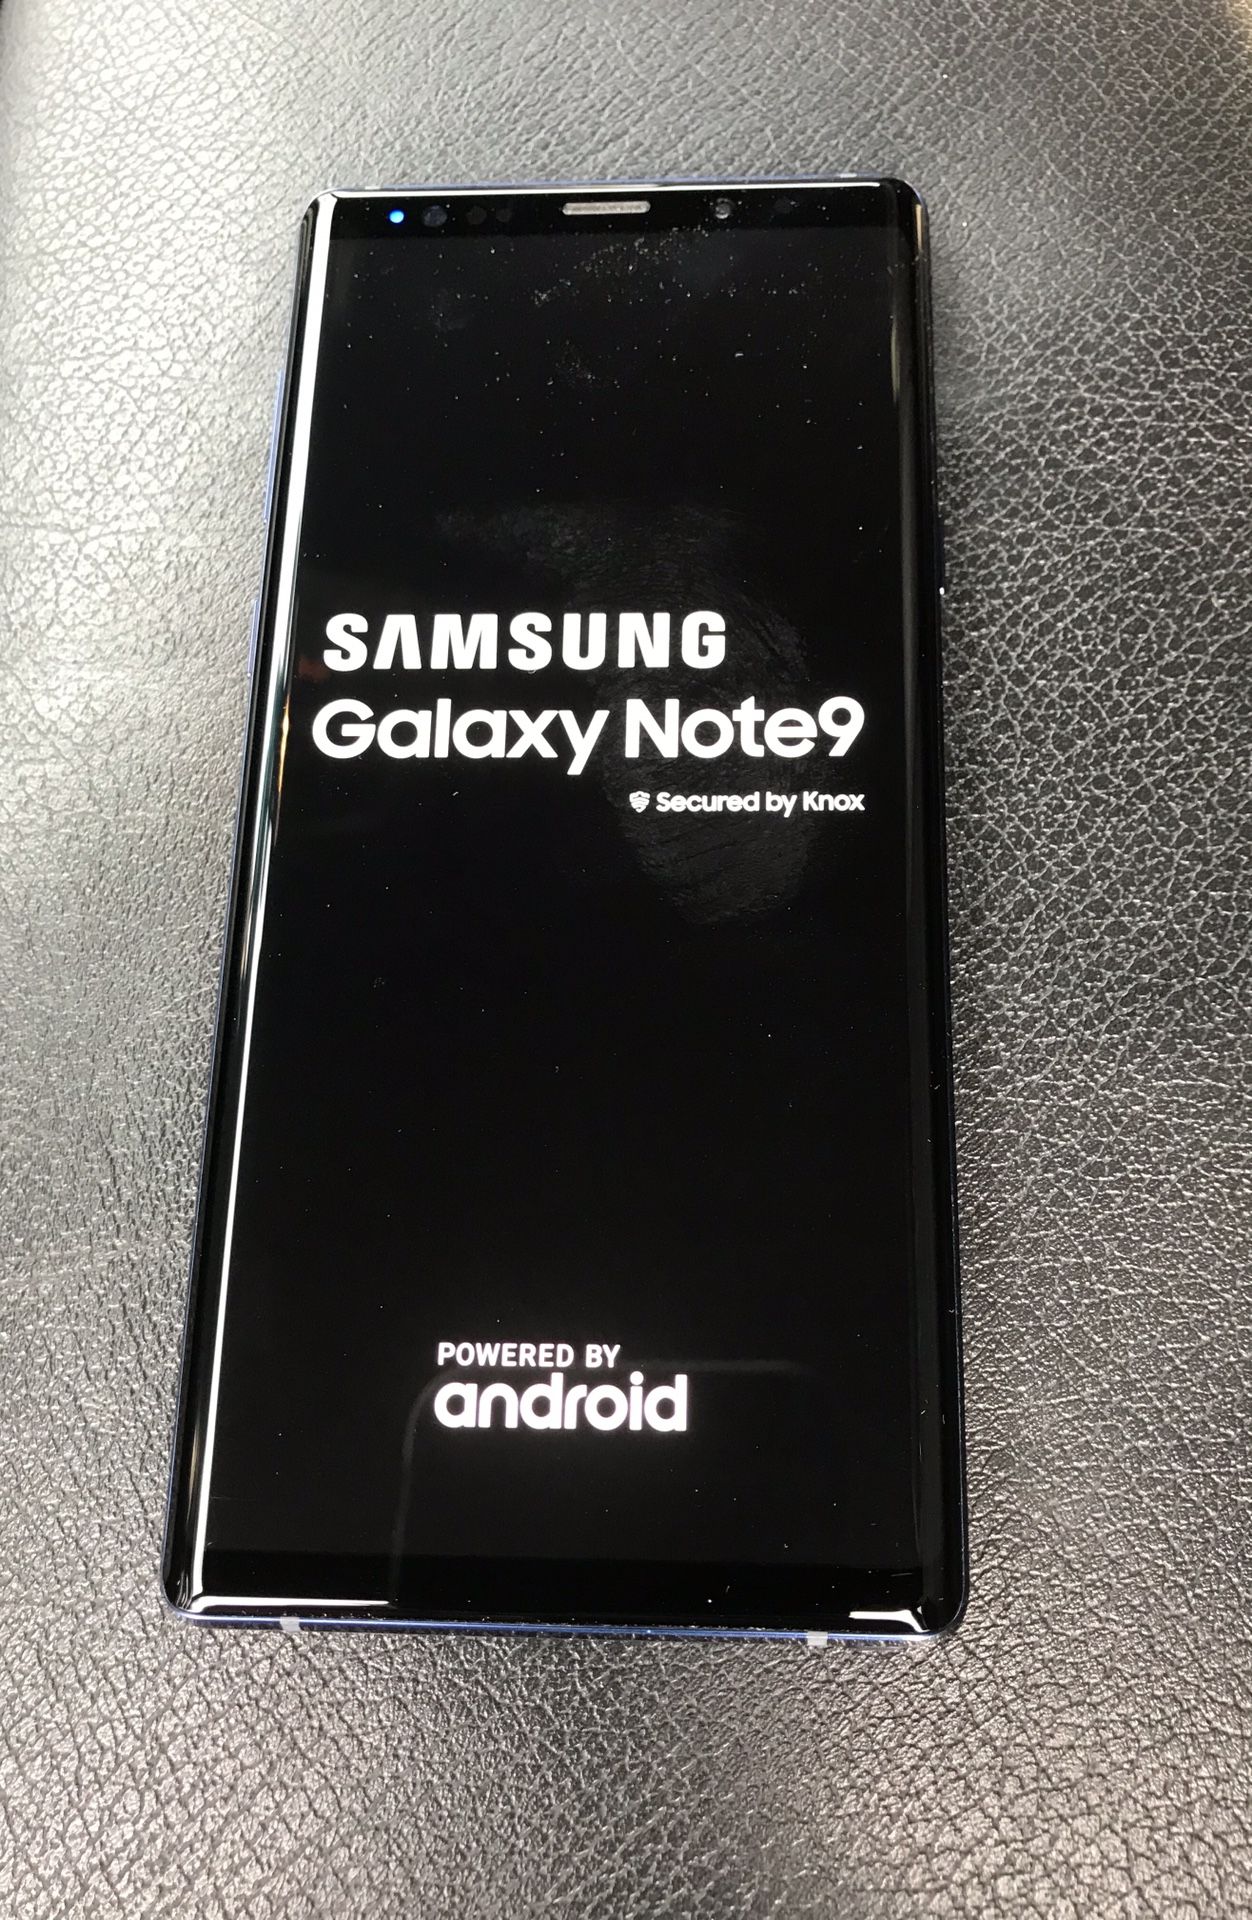 GOOD CONDITION Samsung Galaxy Note 9 128GB (T-Mobile) UNLOCKED +USB CABLE +CHARGER $400 FIRM